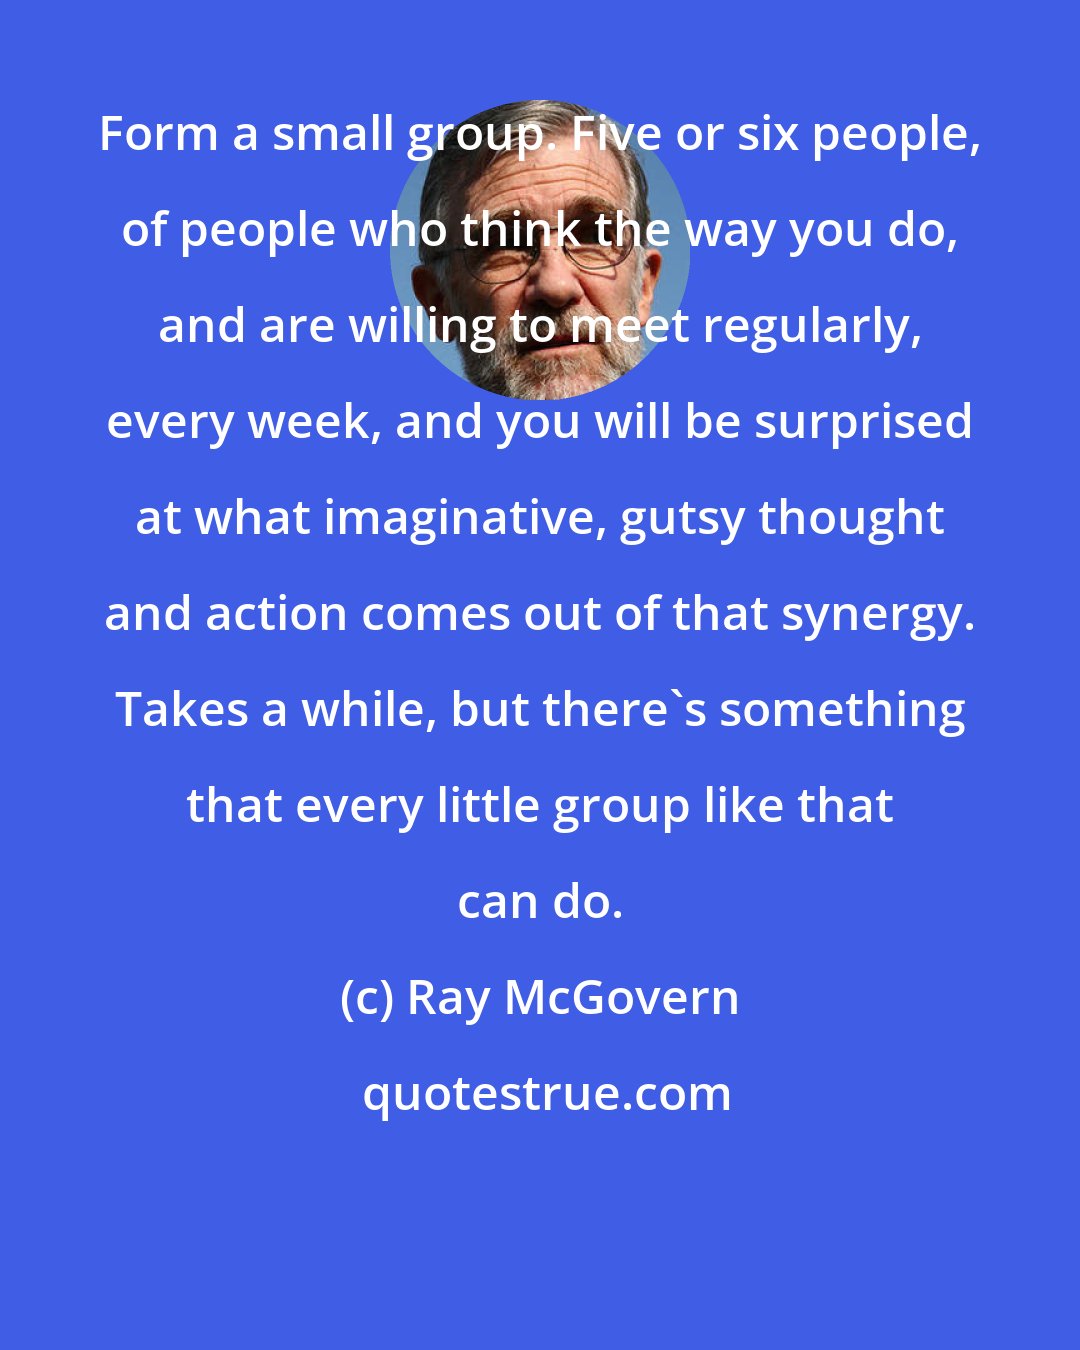 Ray McGovern: Form a small group. Five or six people, of people who think the way you do, and are willing to meet regularly, every week, and you will be surprised at what imaginative, gutsy thought and action comes out of that synergy. Takes a while, but there's something that every little group like that can do.